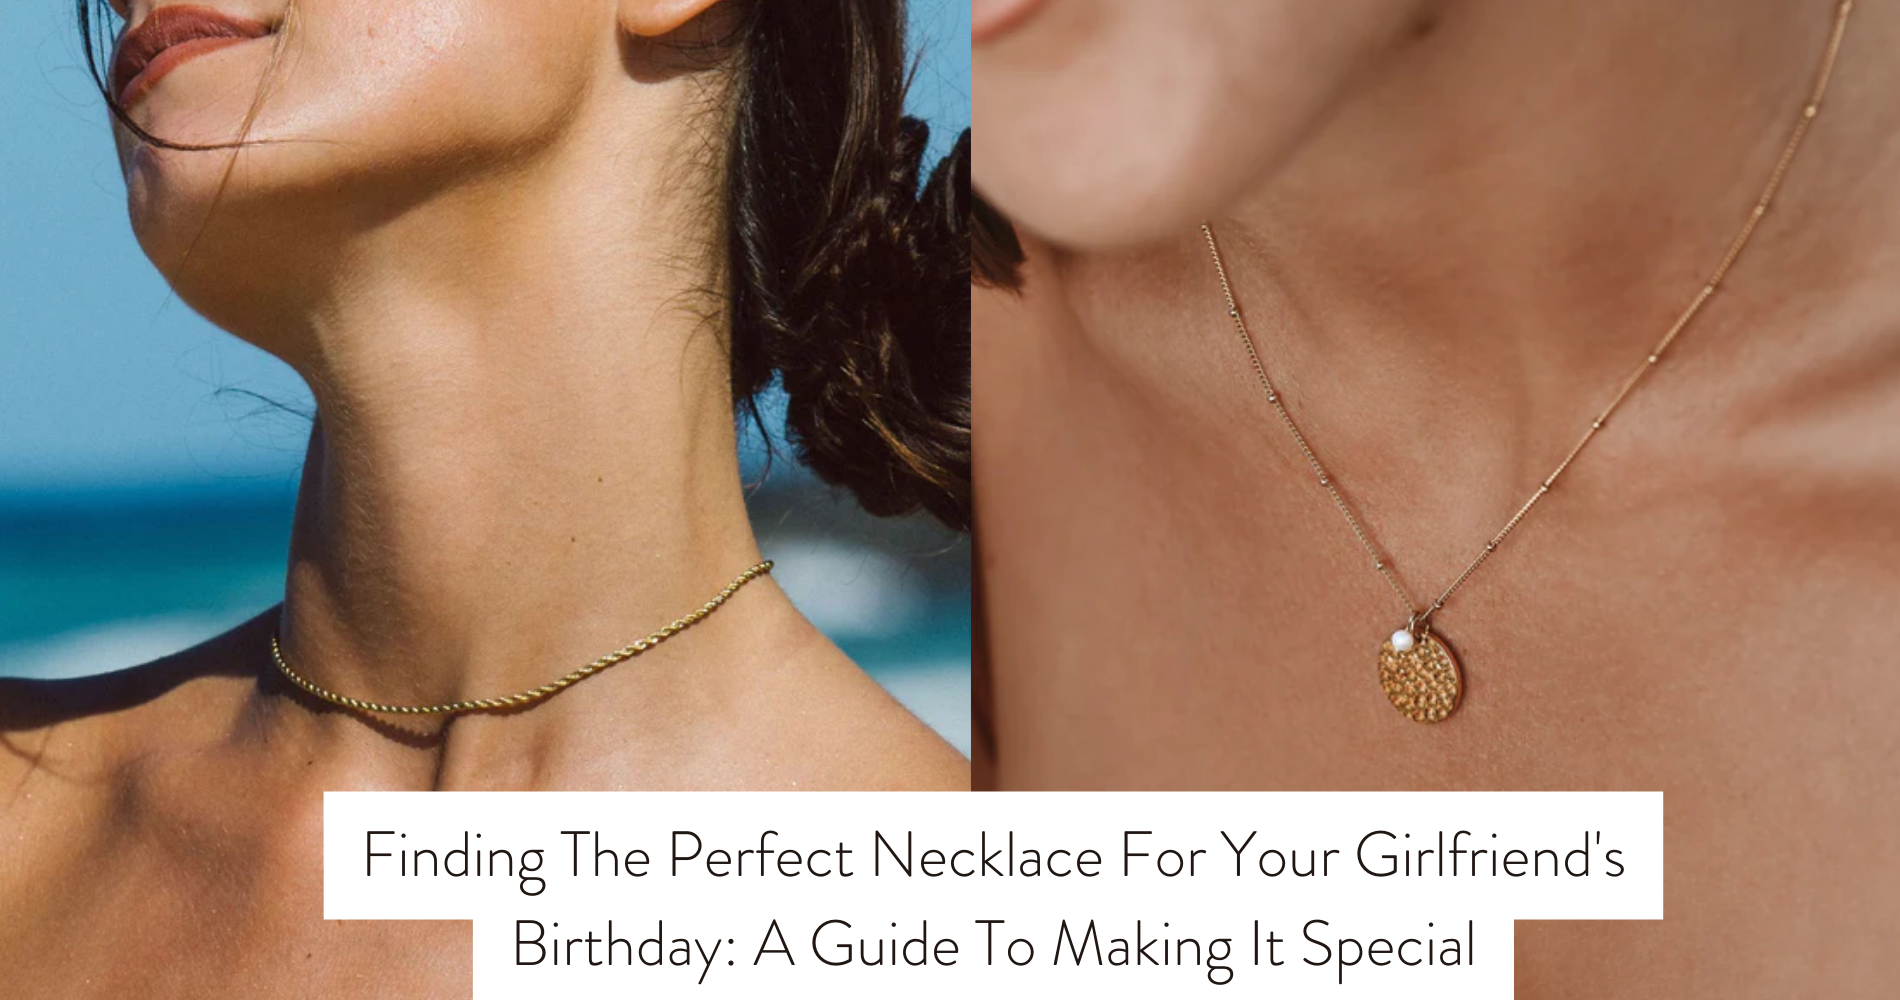 Finding The Perfect Necklace For Your Girlfriend's Birthday: A Guide To Making It Special